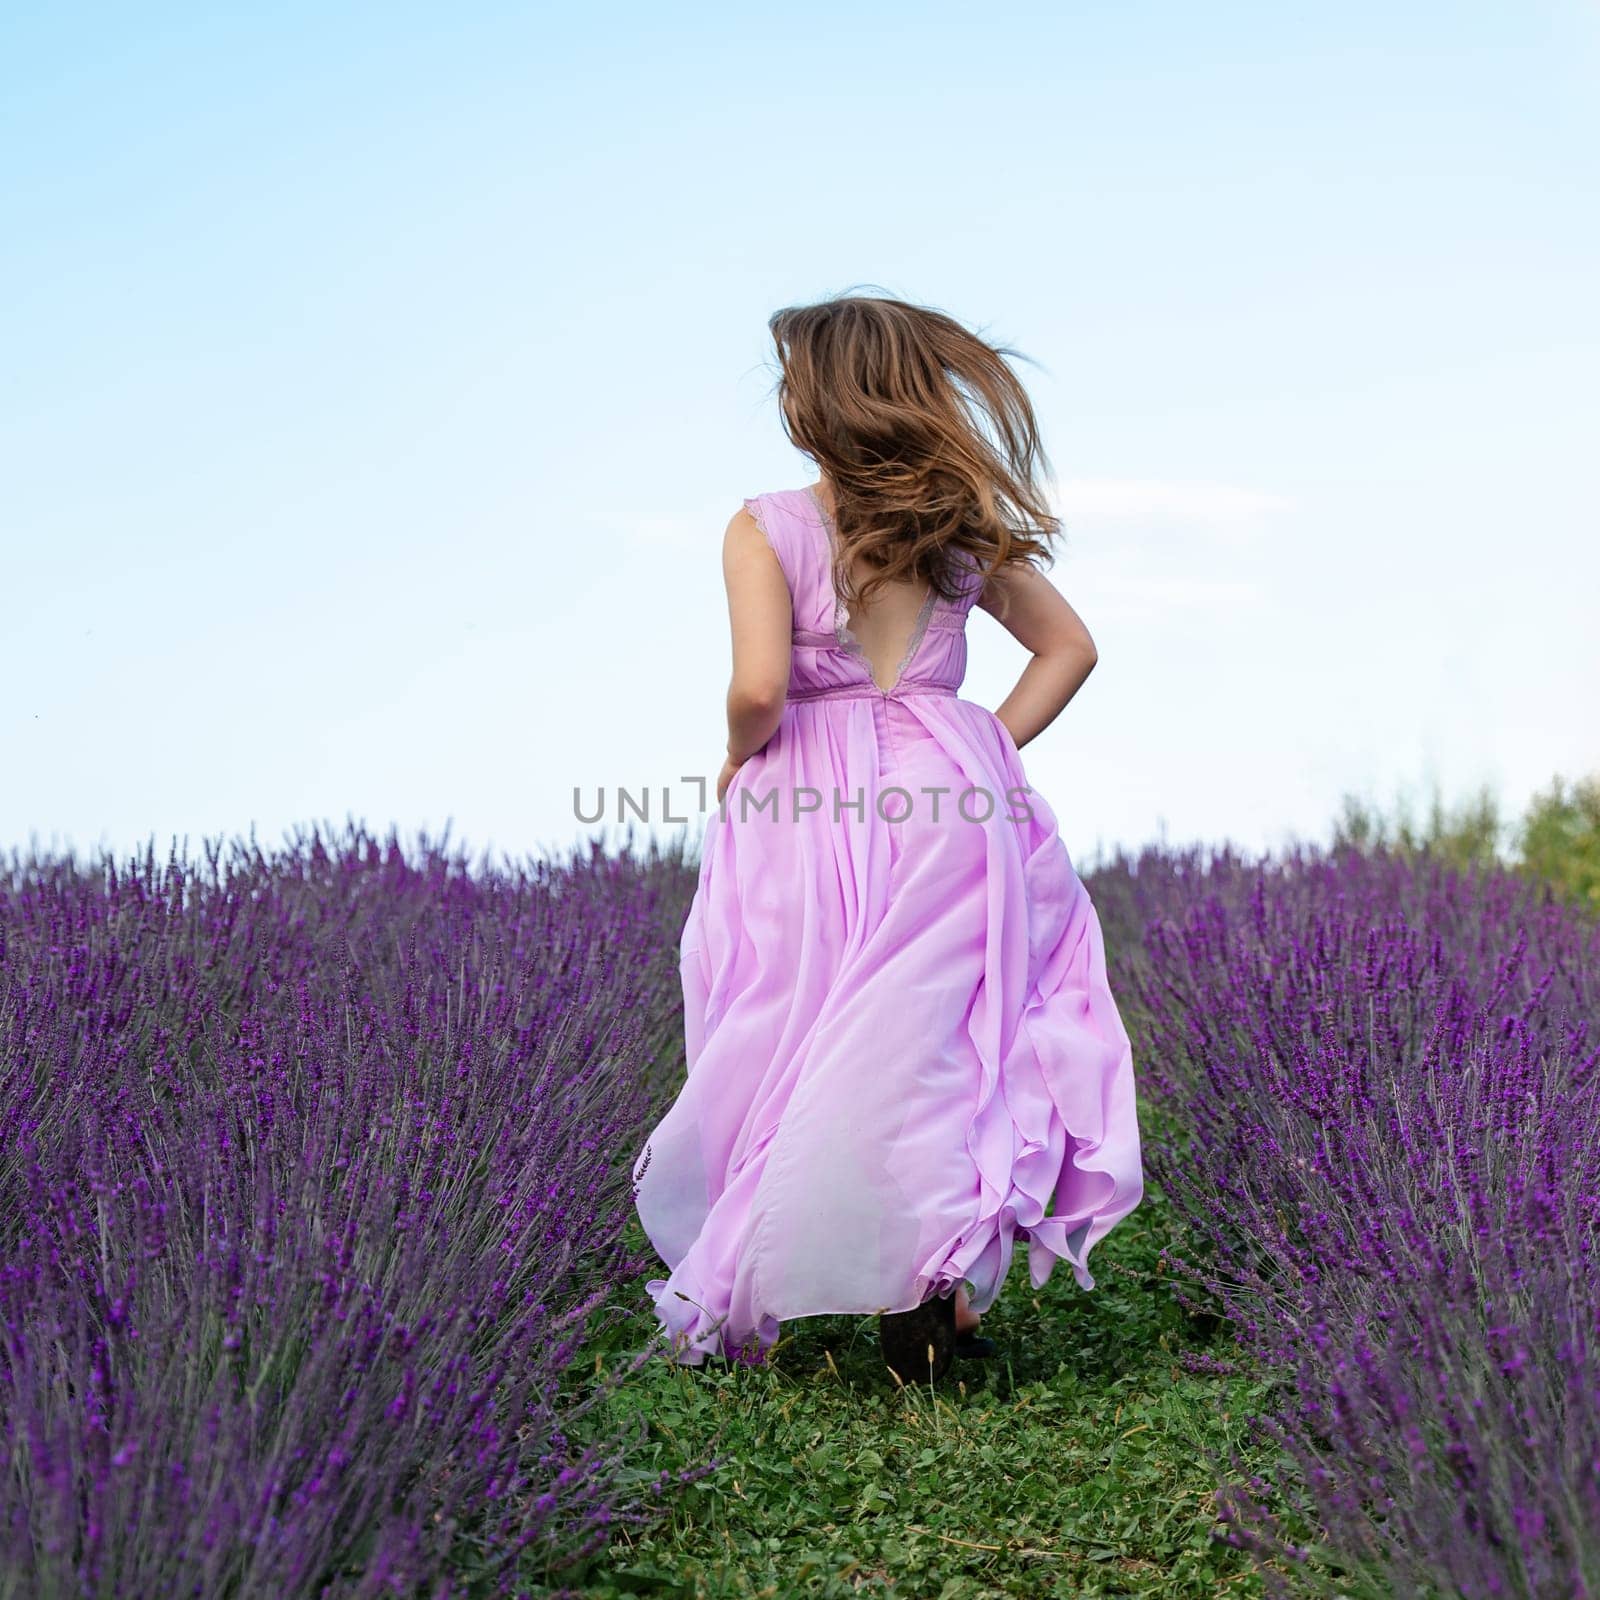 A young girl in a purple long dress runs between the lavender rows on the grass. by Niko_Cingaryuk